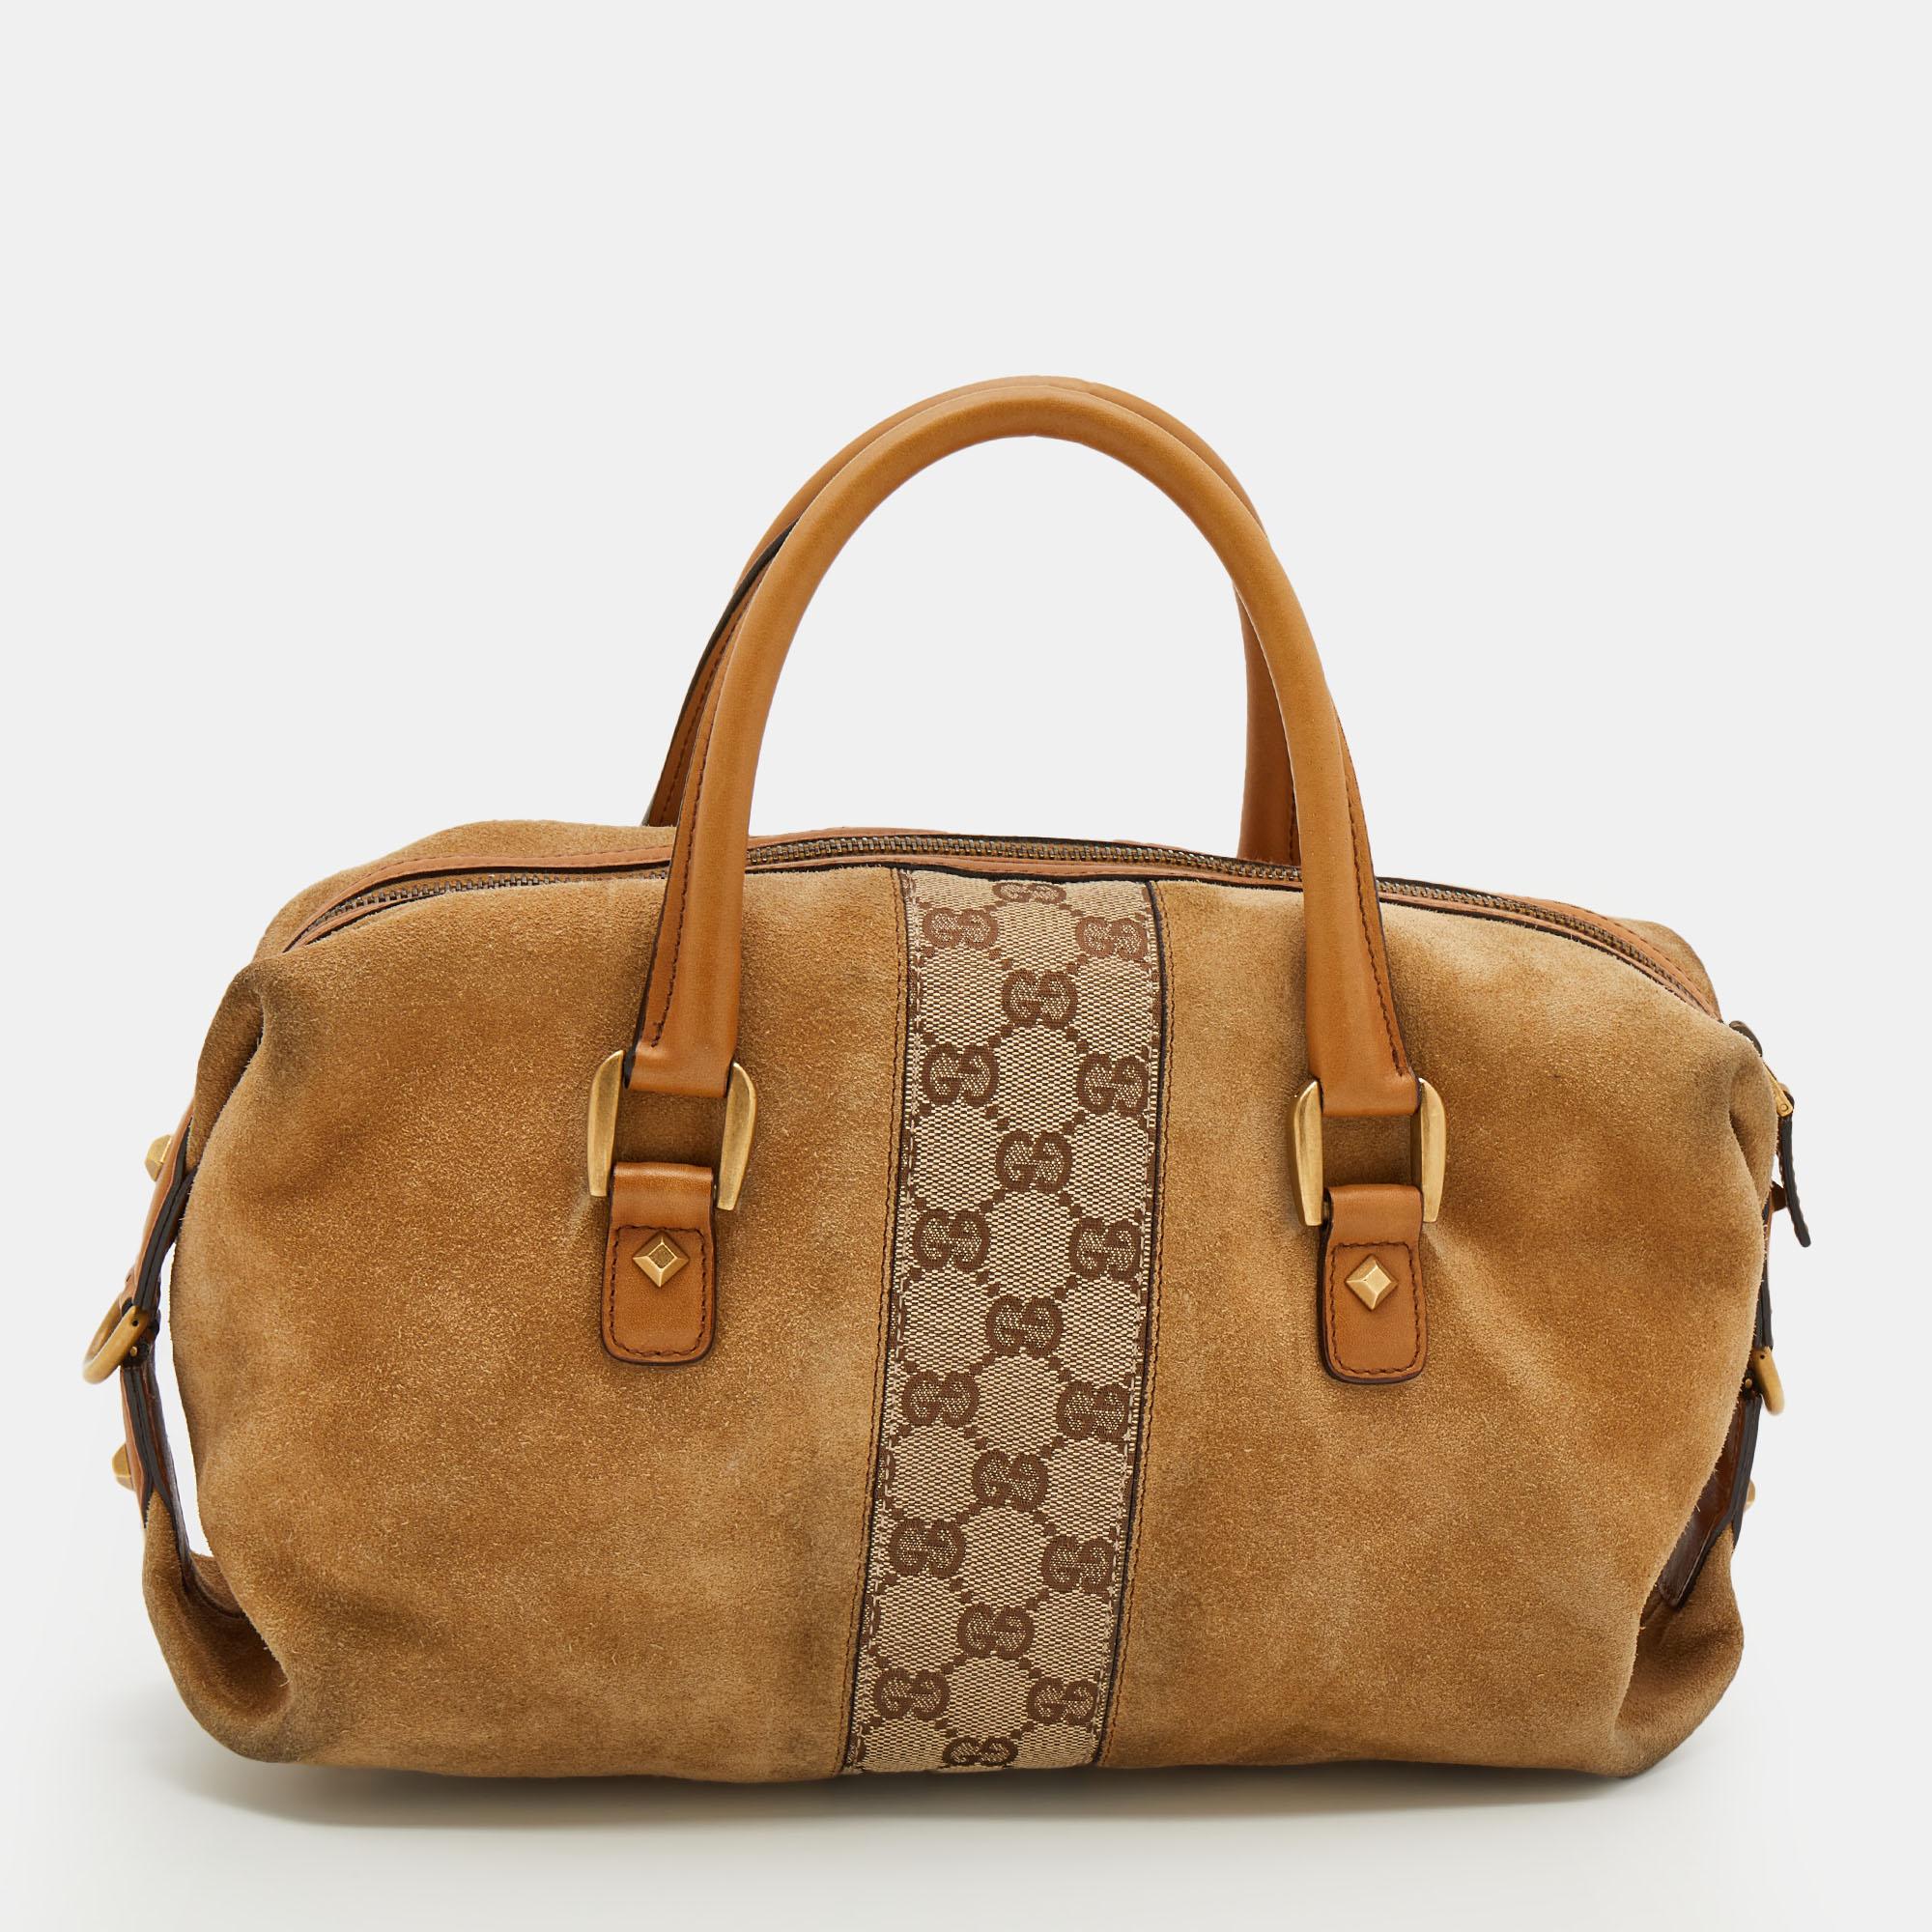 Get style and carry your essentials with ease using this Gucci Boston bag. It has been crafted from GG canvas, tan suede, and gold-tone hardware. The bag has two short handles and a spacious fabric interior.

Includes: Original Dustbag